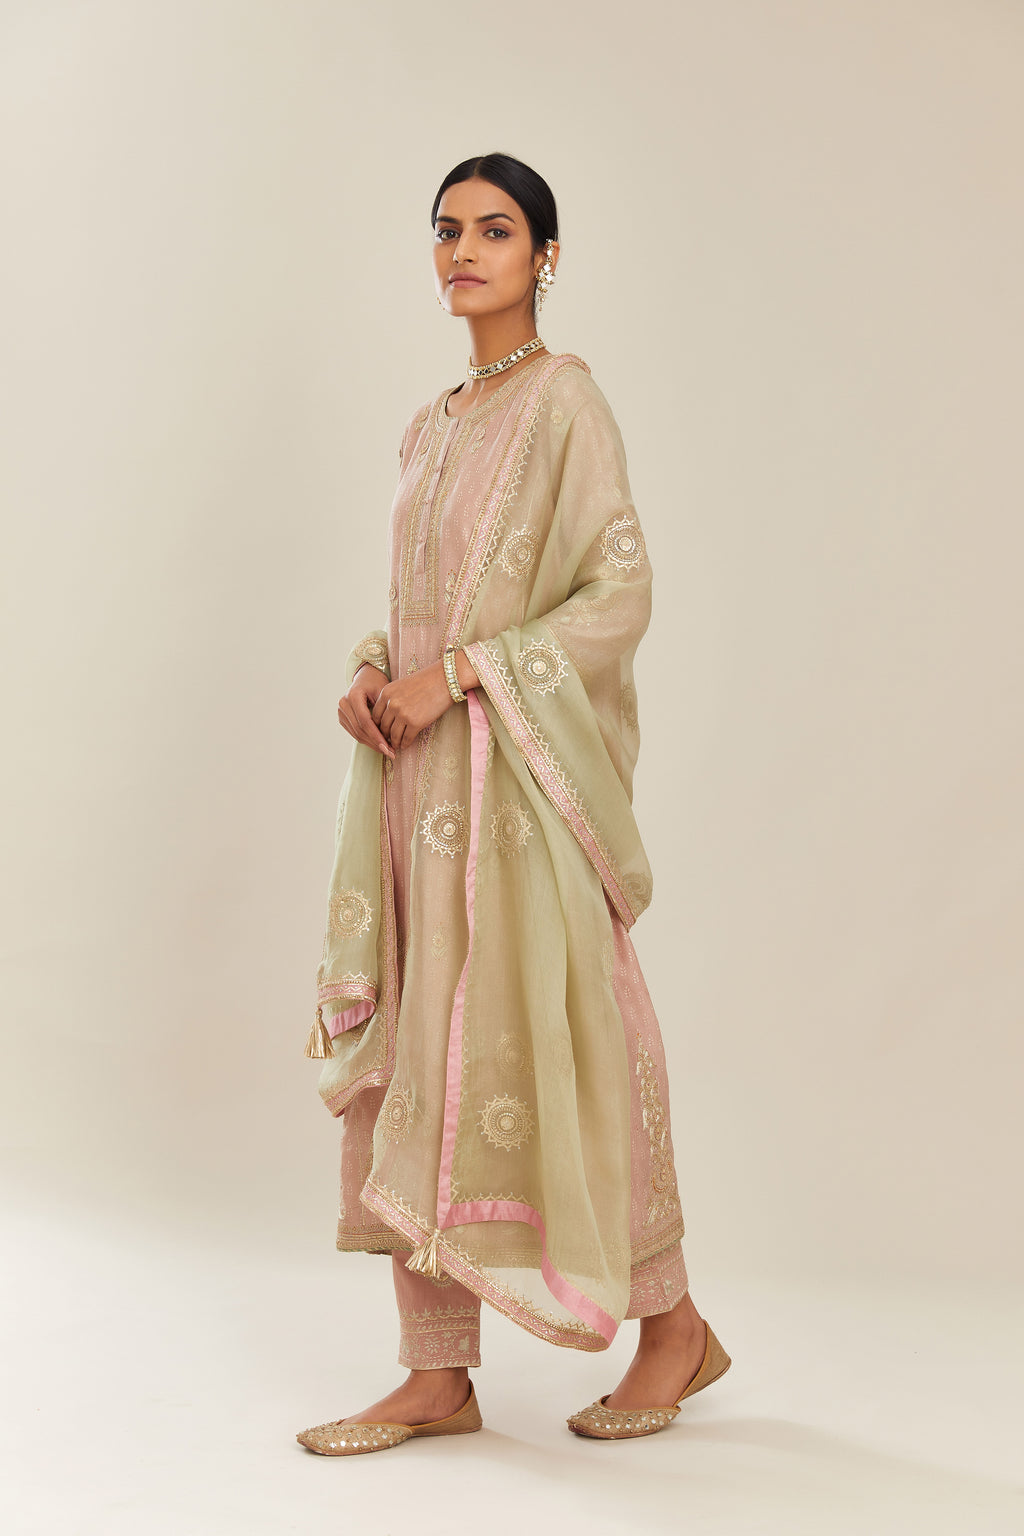 Old rose hand block printed silk chanderi kurta set with side panels, highlighted with gold gota and zari embroidery.